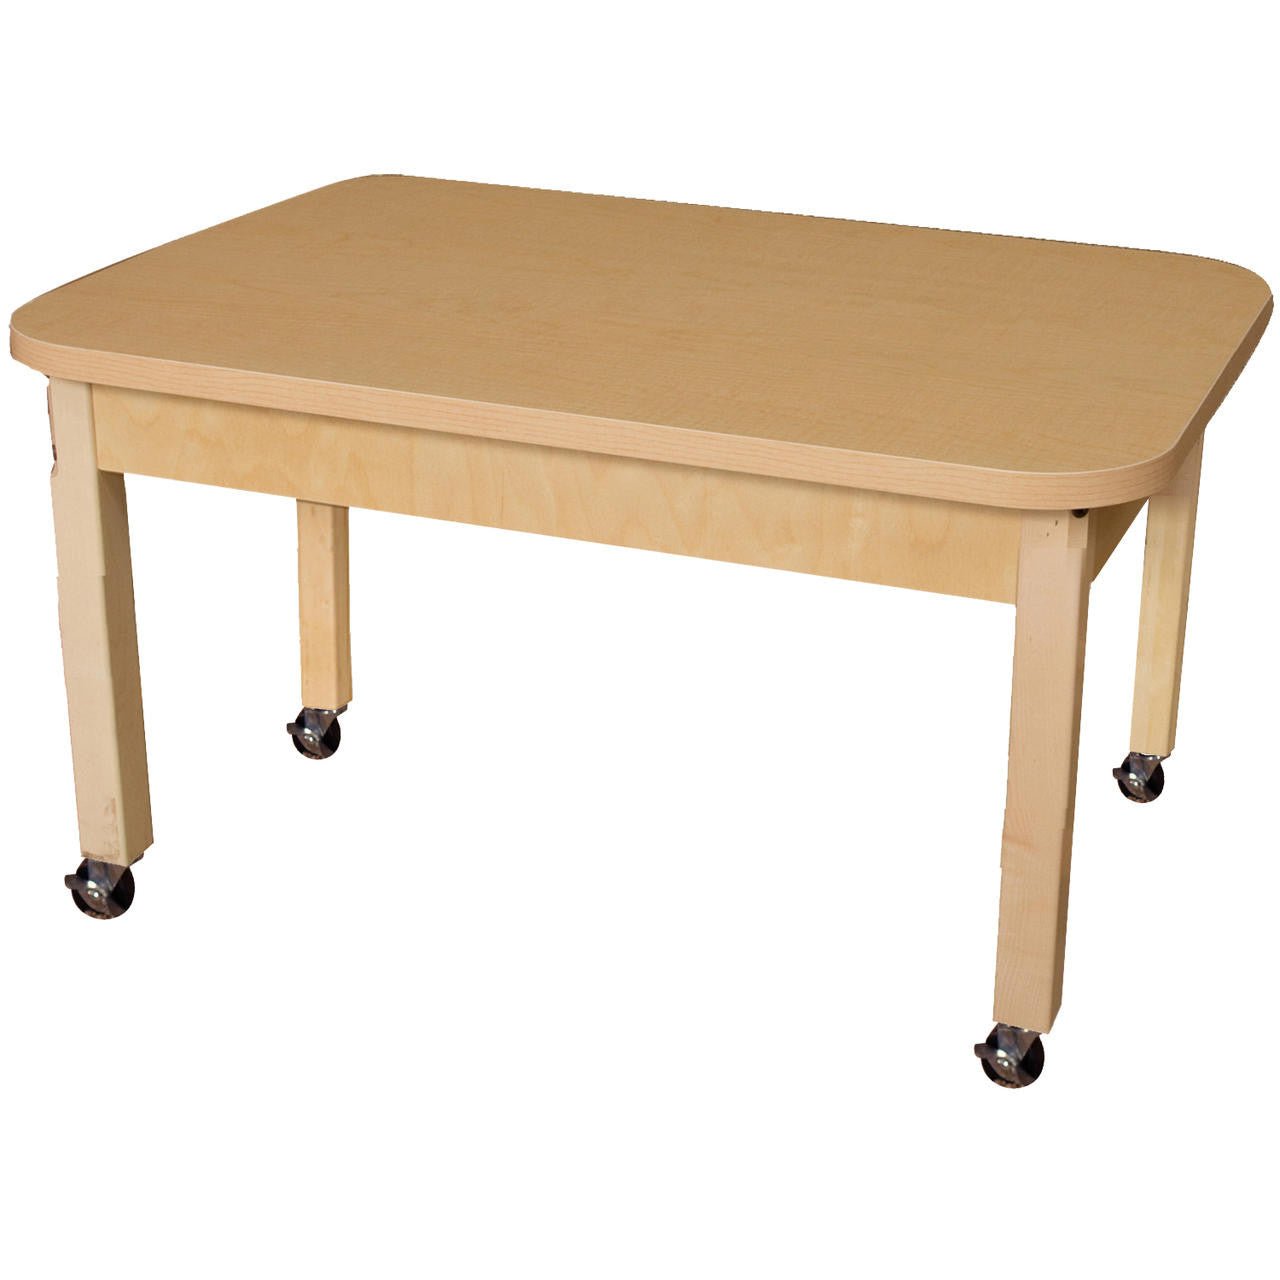 Rectangle High Pressure Laminate Table with Hardwood Legs- 14